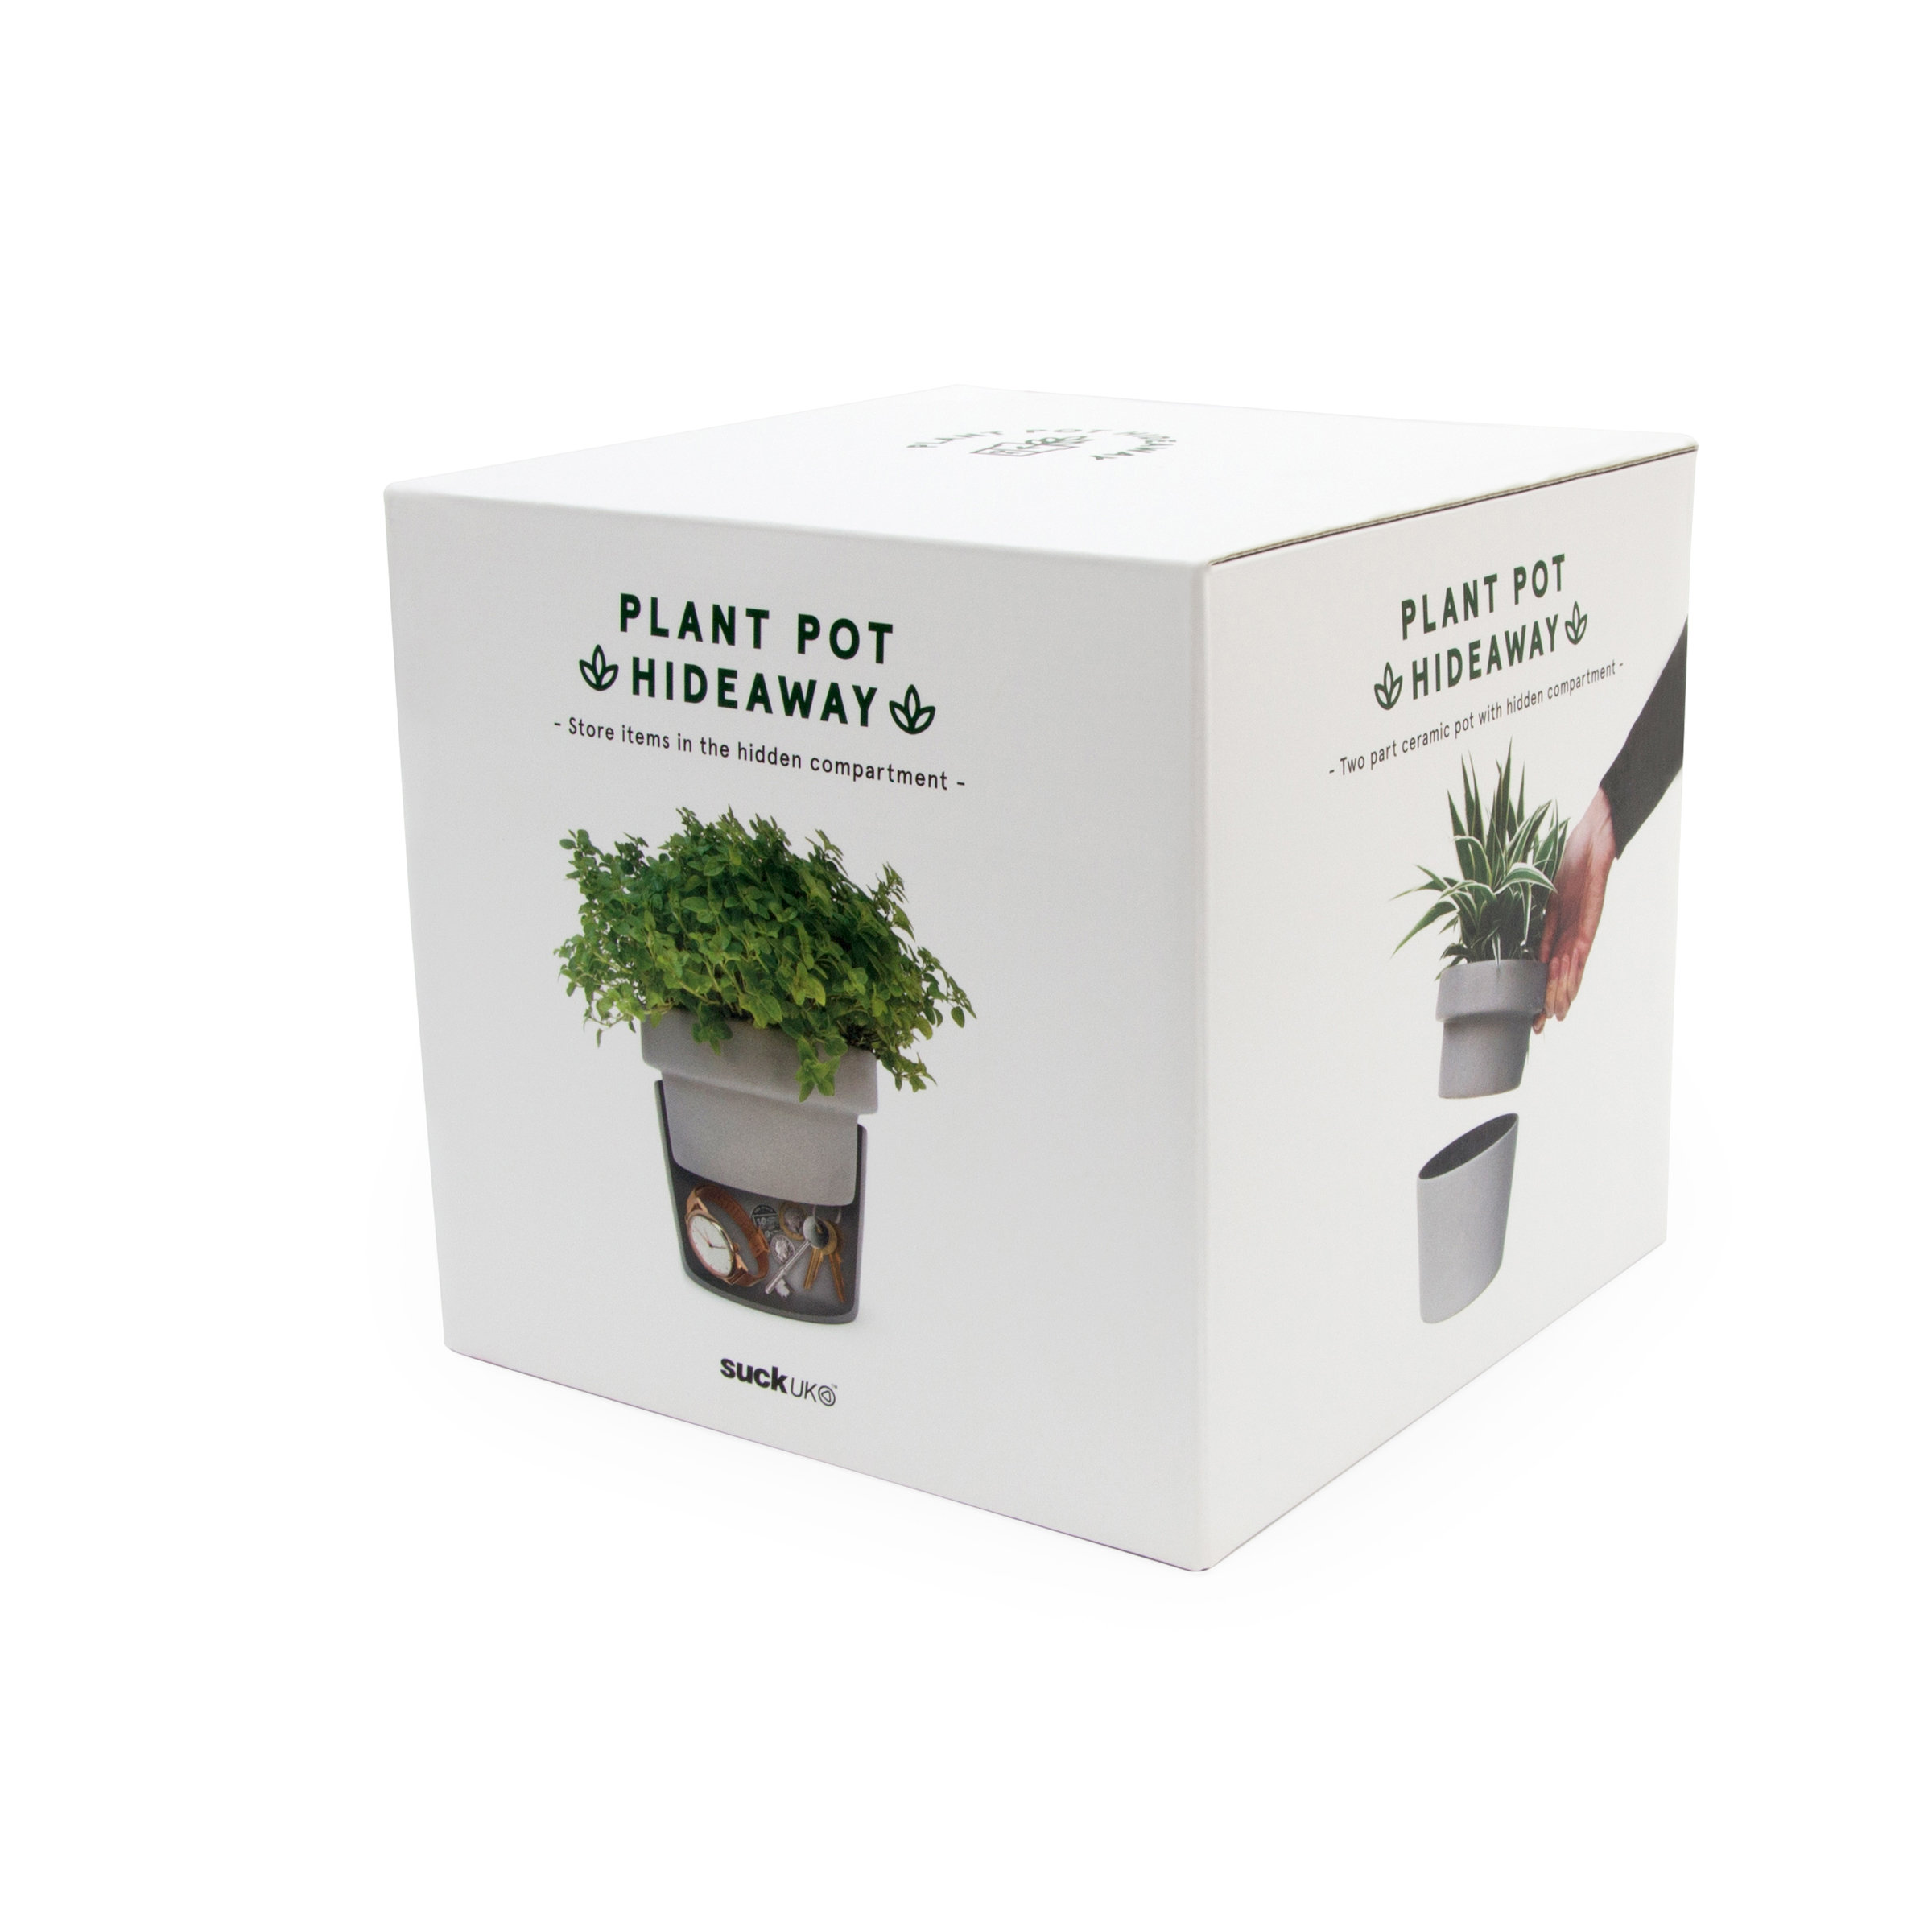 Plant Pot Packaging